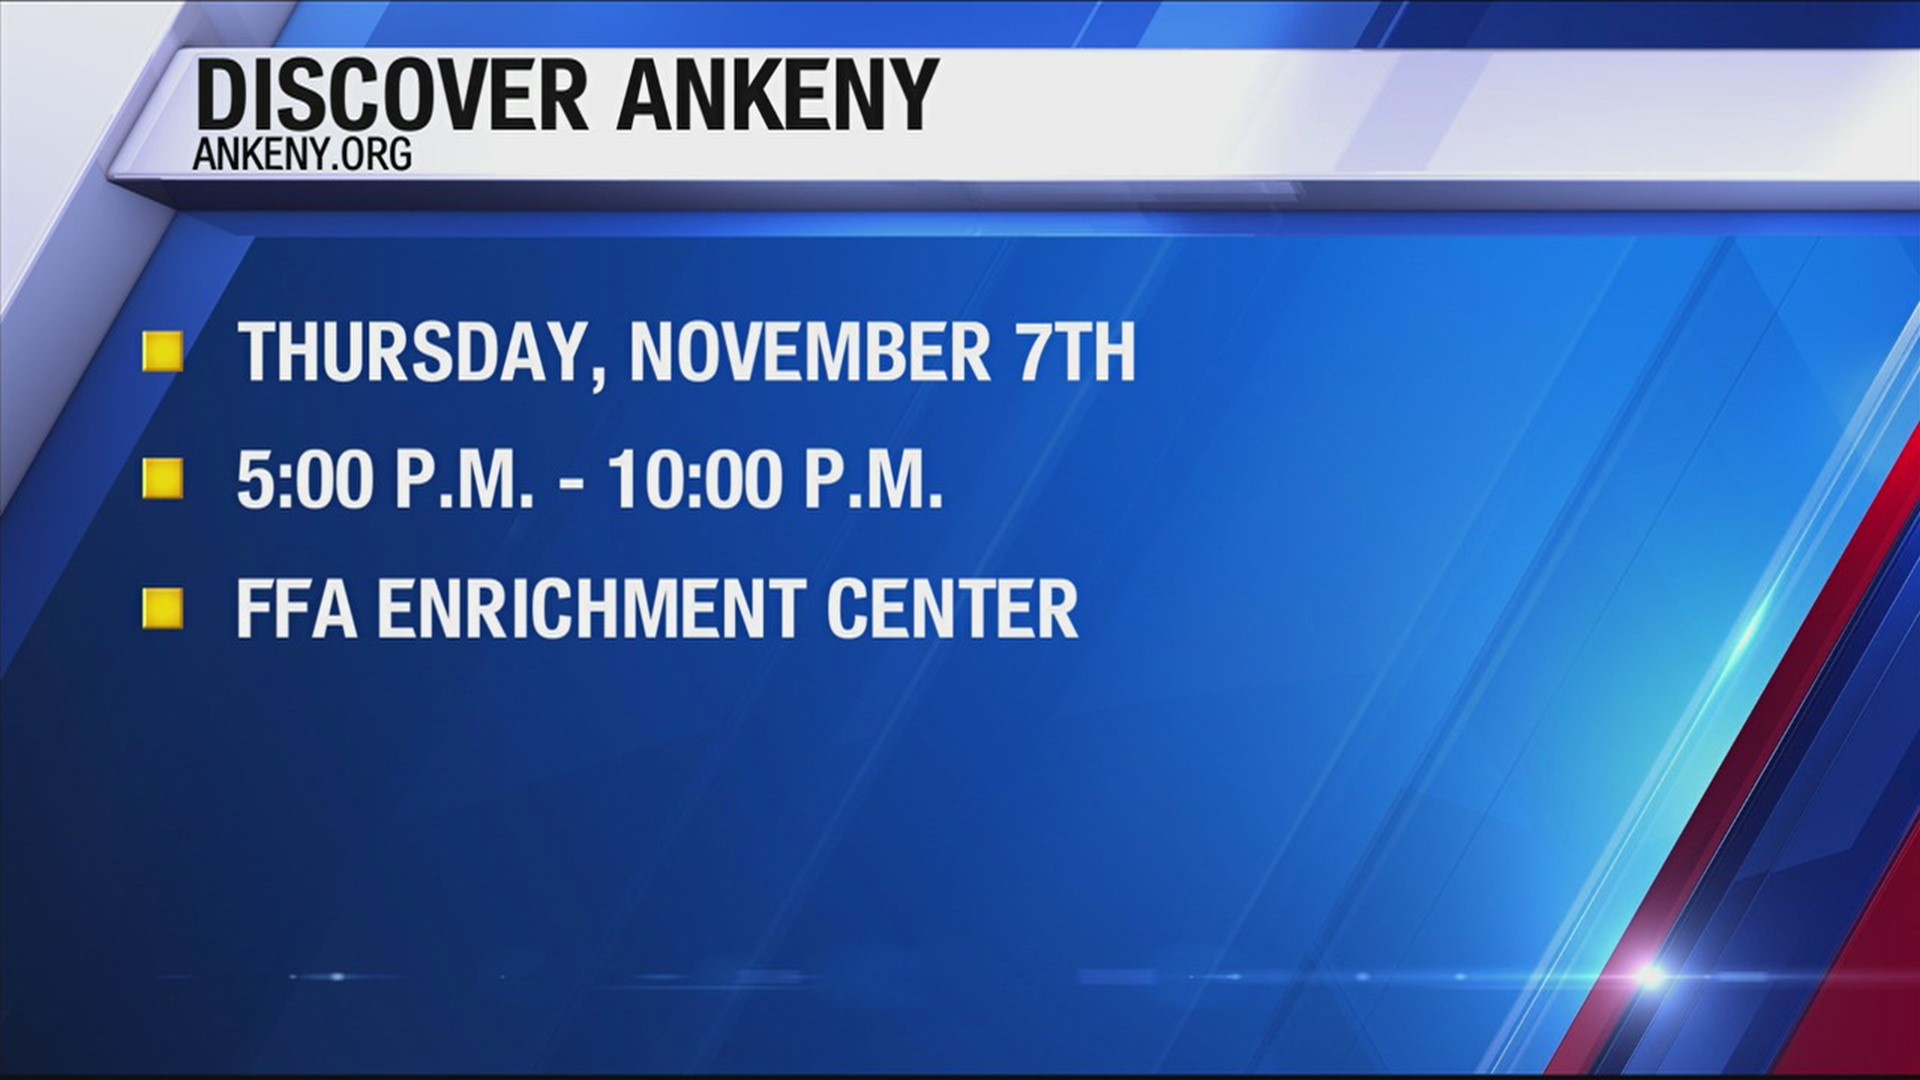 Discover Ankeny this Thursday